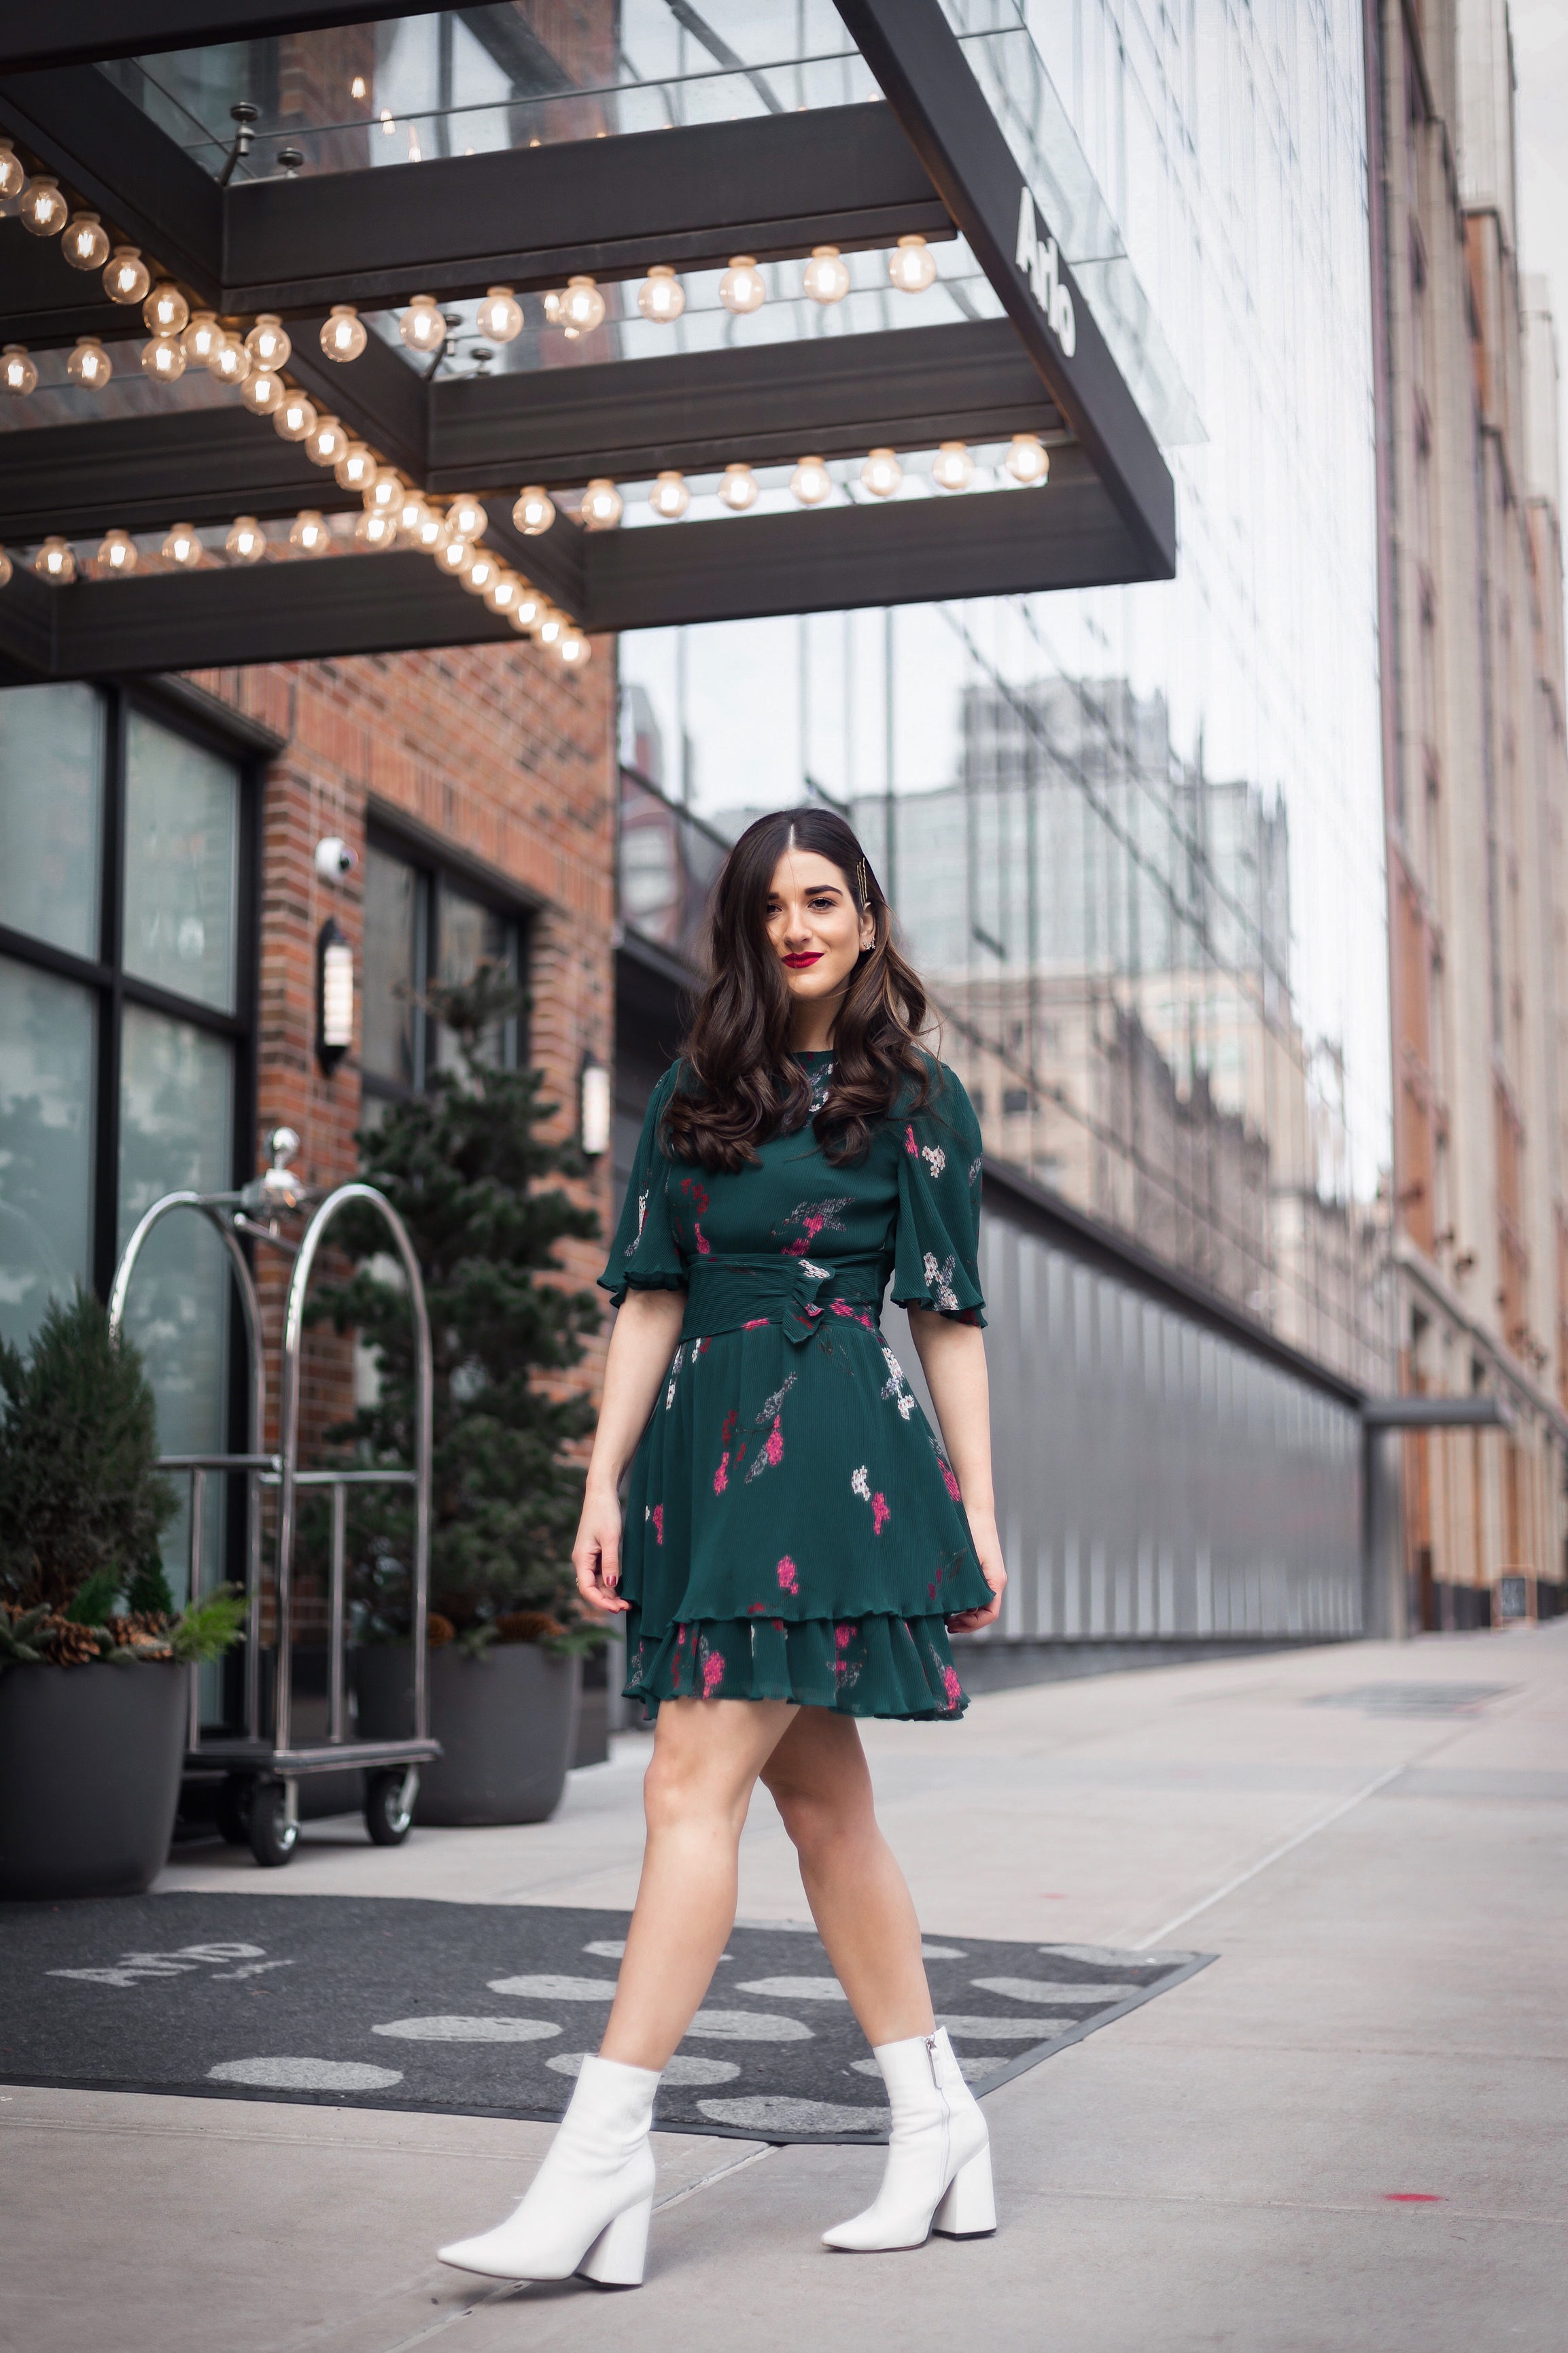 10 NYC Experiences Everyone Should Have Green Floral Dress White Booties Esther Santer Fashion Blog NYC Street Style Blogger Outfit OOTD Trendy Shopping Girl What How To Wear Bobby Pins Hairstyle Fall Look Butterfly Sleeves Keepsake Label Arlo  Soho.JPG